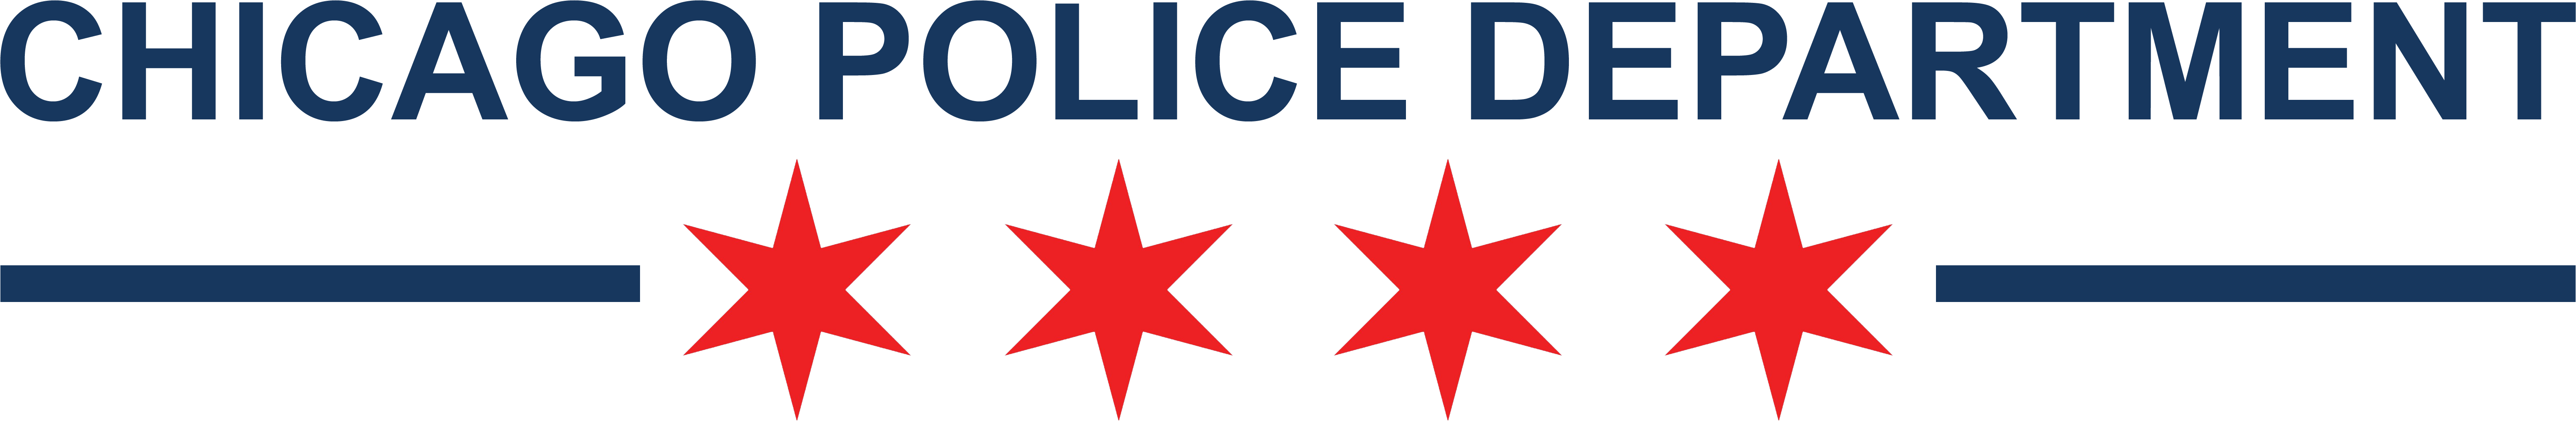 City of Chicago Police Department Independent Monitoring Proposal